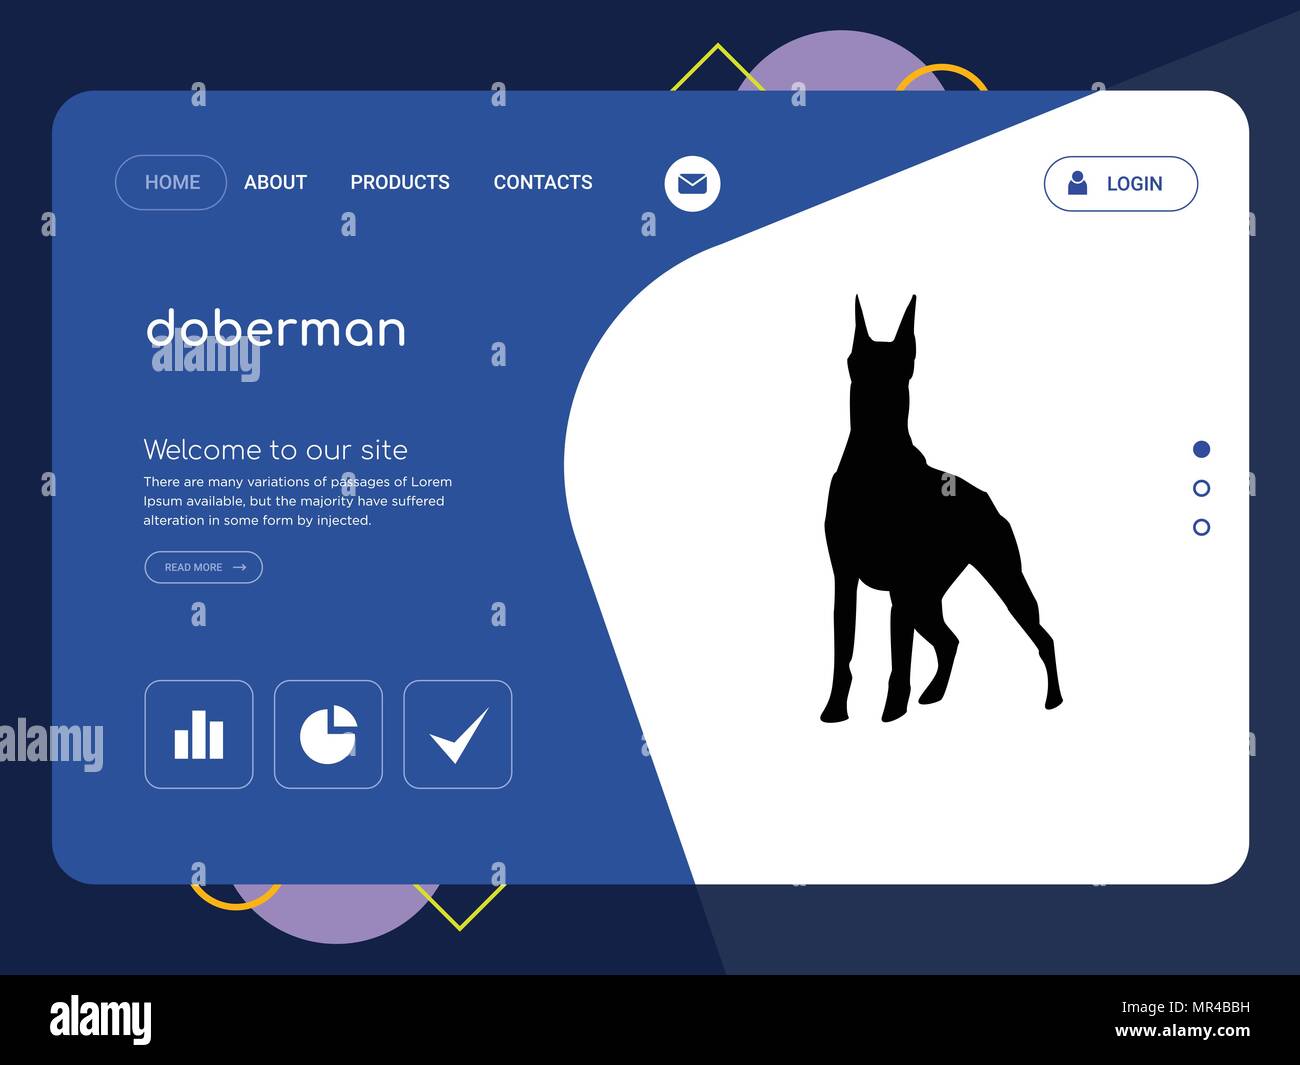 Quality One Page doberman Website Template Vector Eps, Modern Web Design with flat UI elements and landscape illustration, ideal for landing page Stock Vector